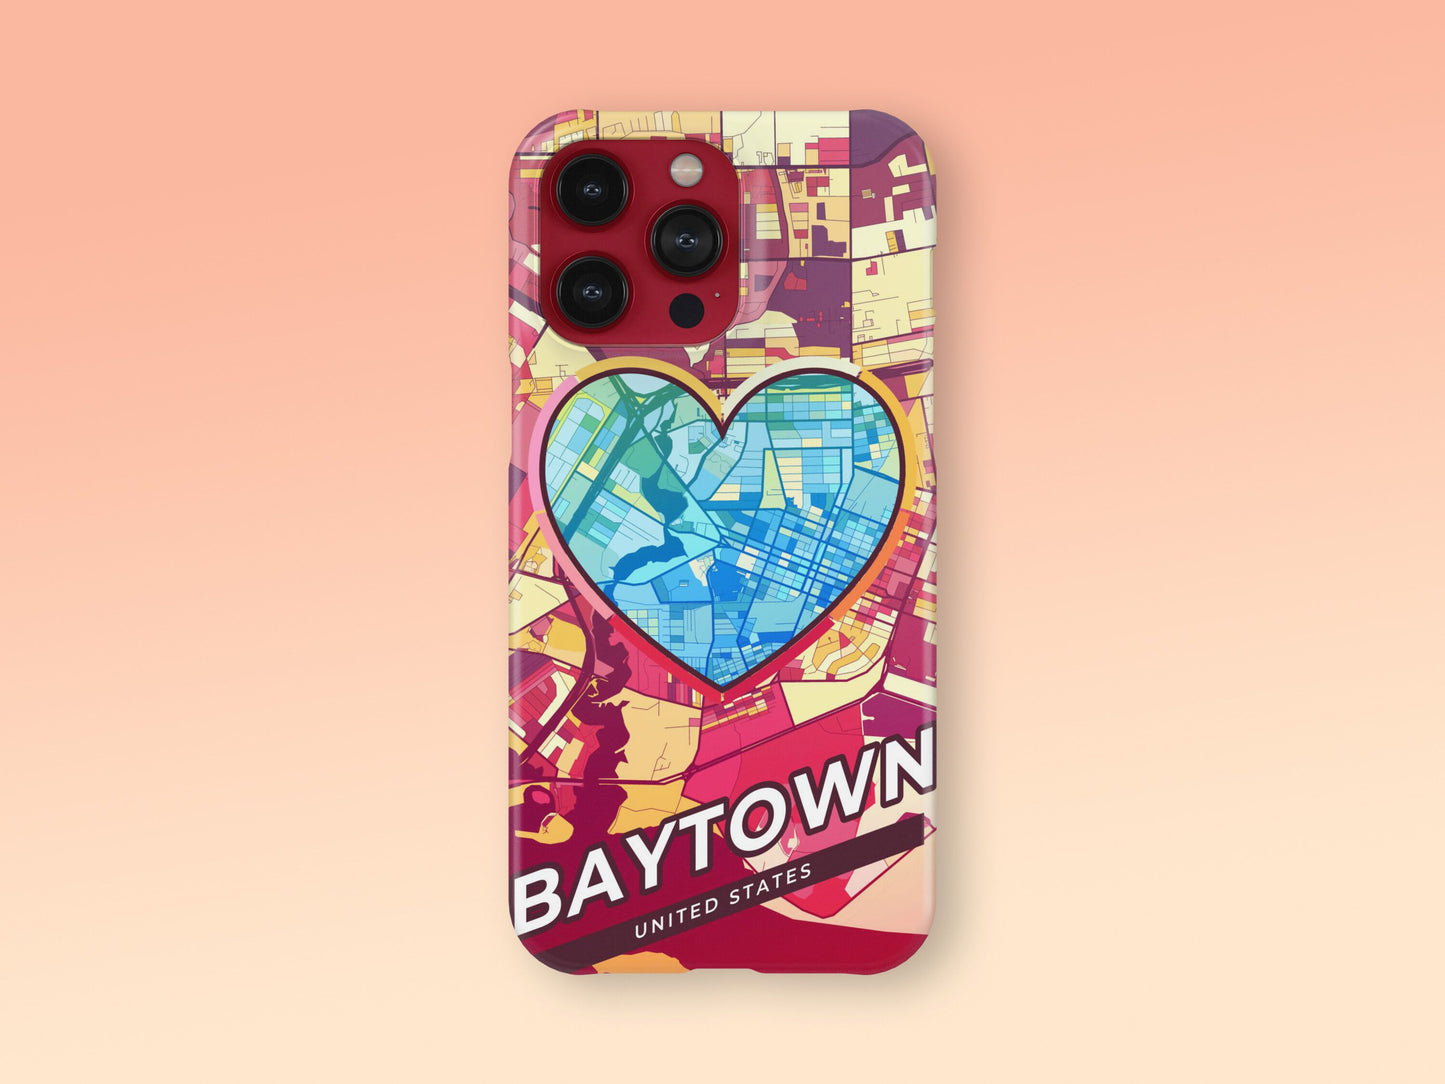 Baytown Texas slim phone case with colorful icon. Birthday, wedding or housewarming gift. Couple match cases. 2